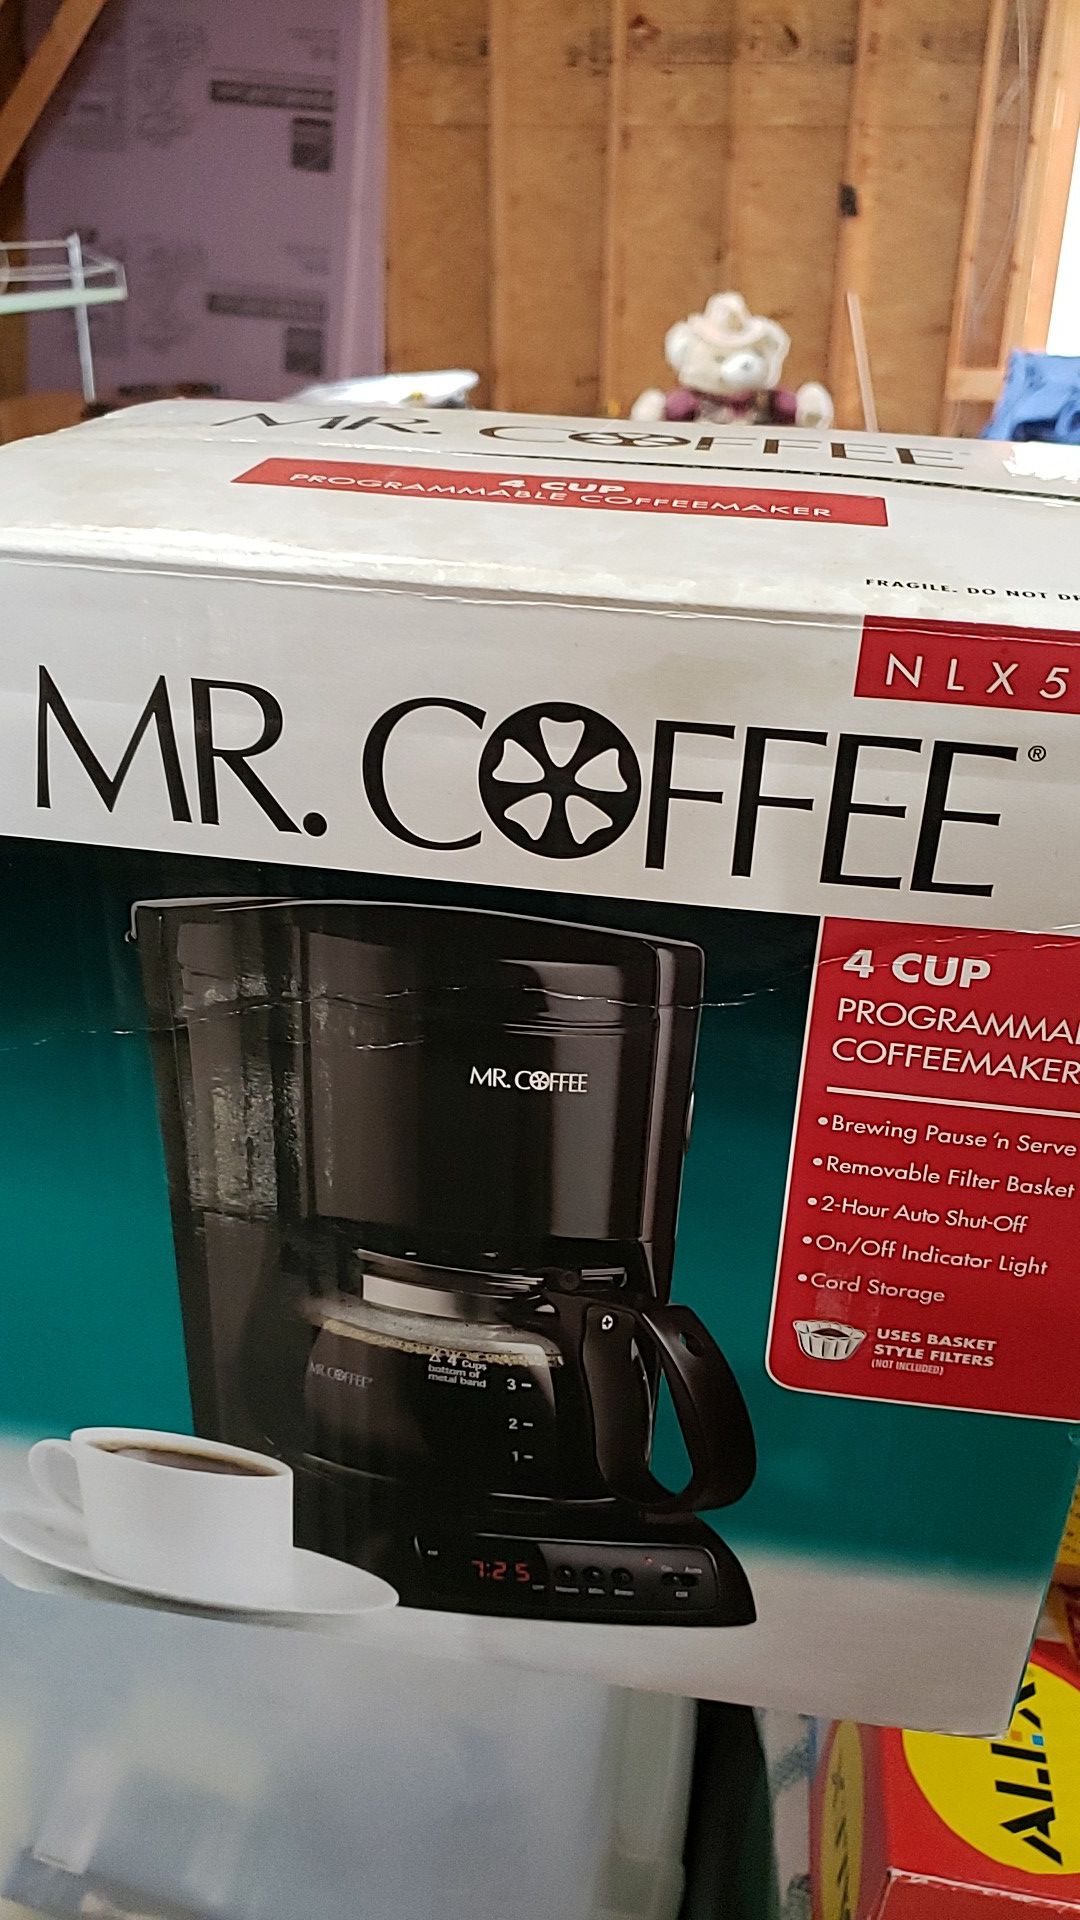 Mr. Coffee 4 cup programmable coffee maker